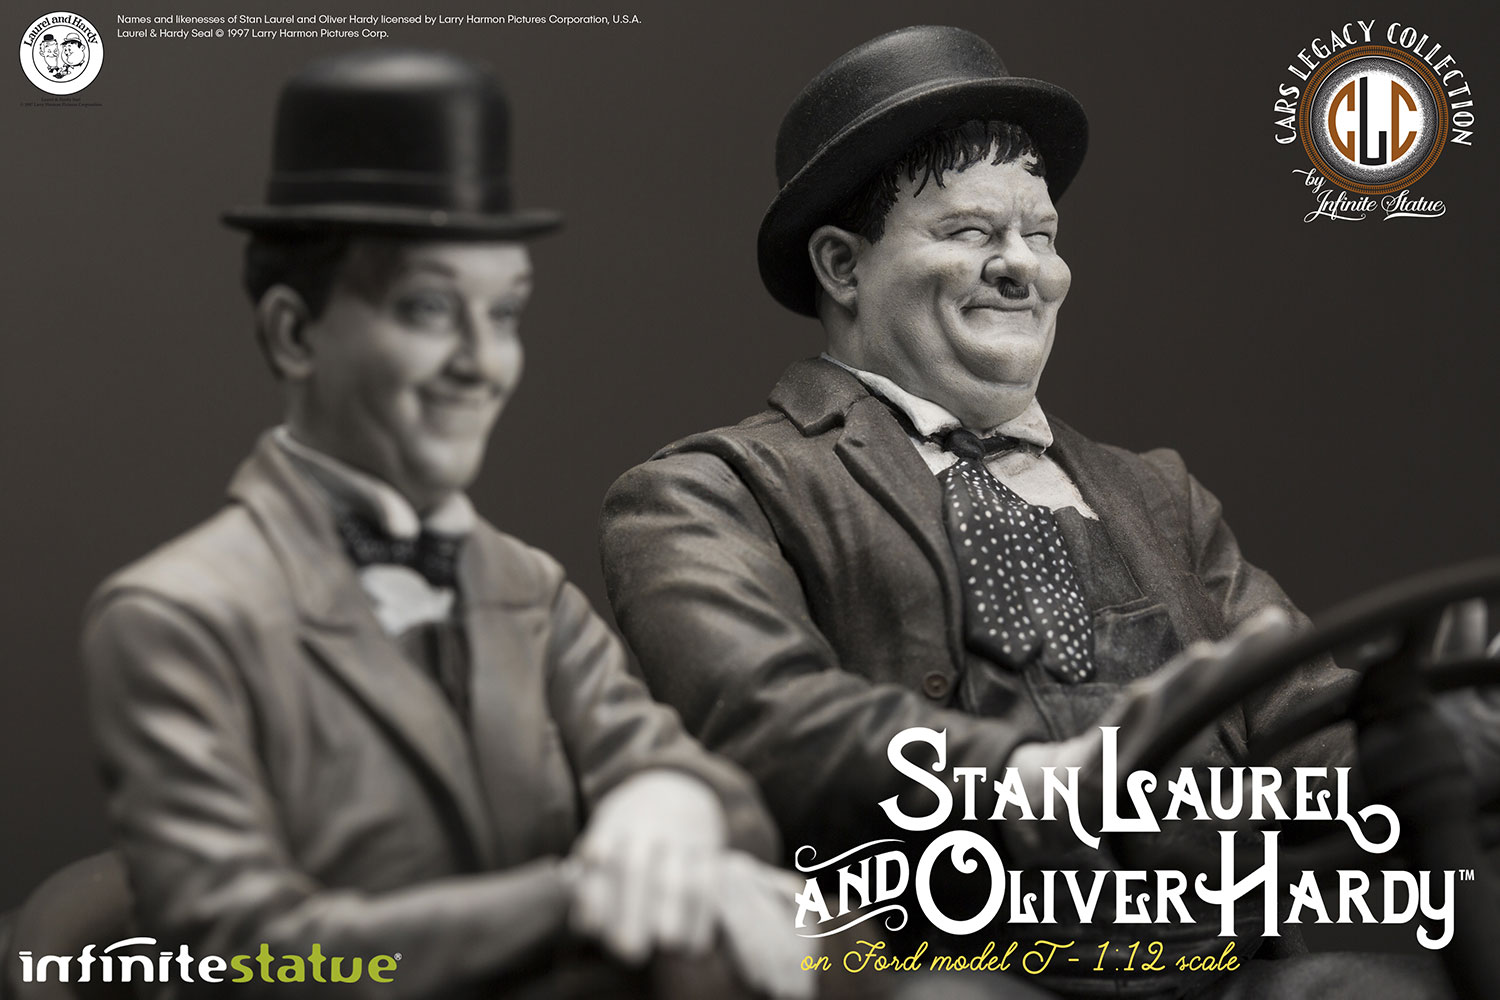 Laurel & Hardy on Ford Model T (Prototype Shown) View 4